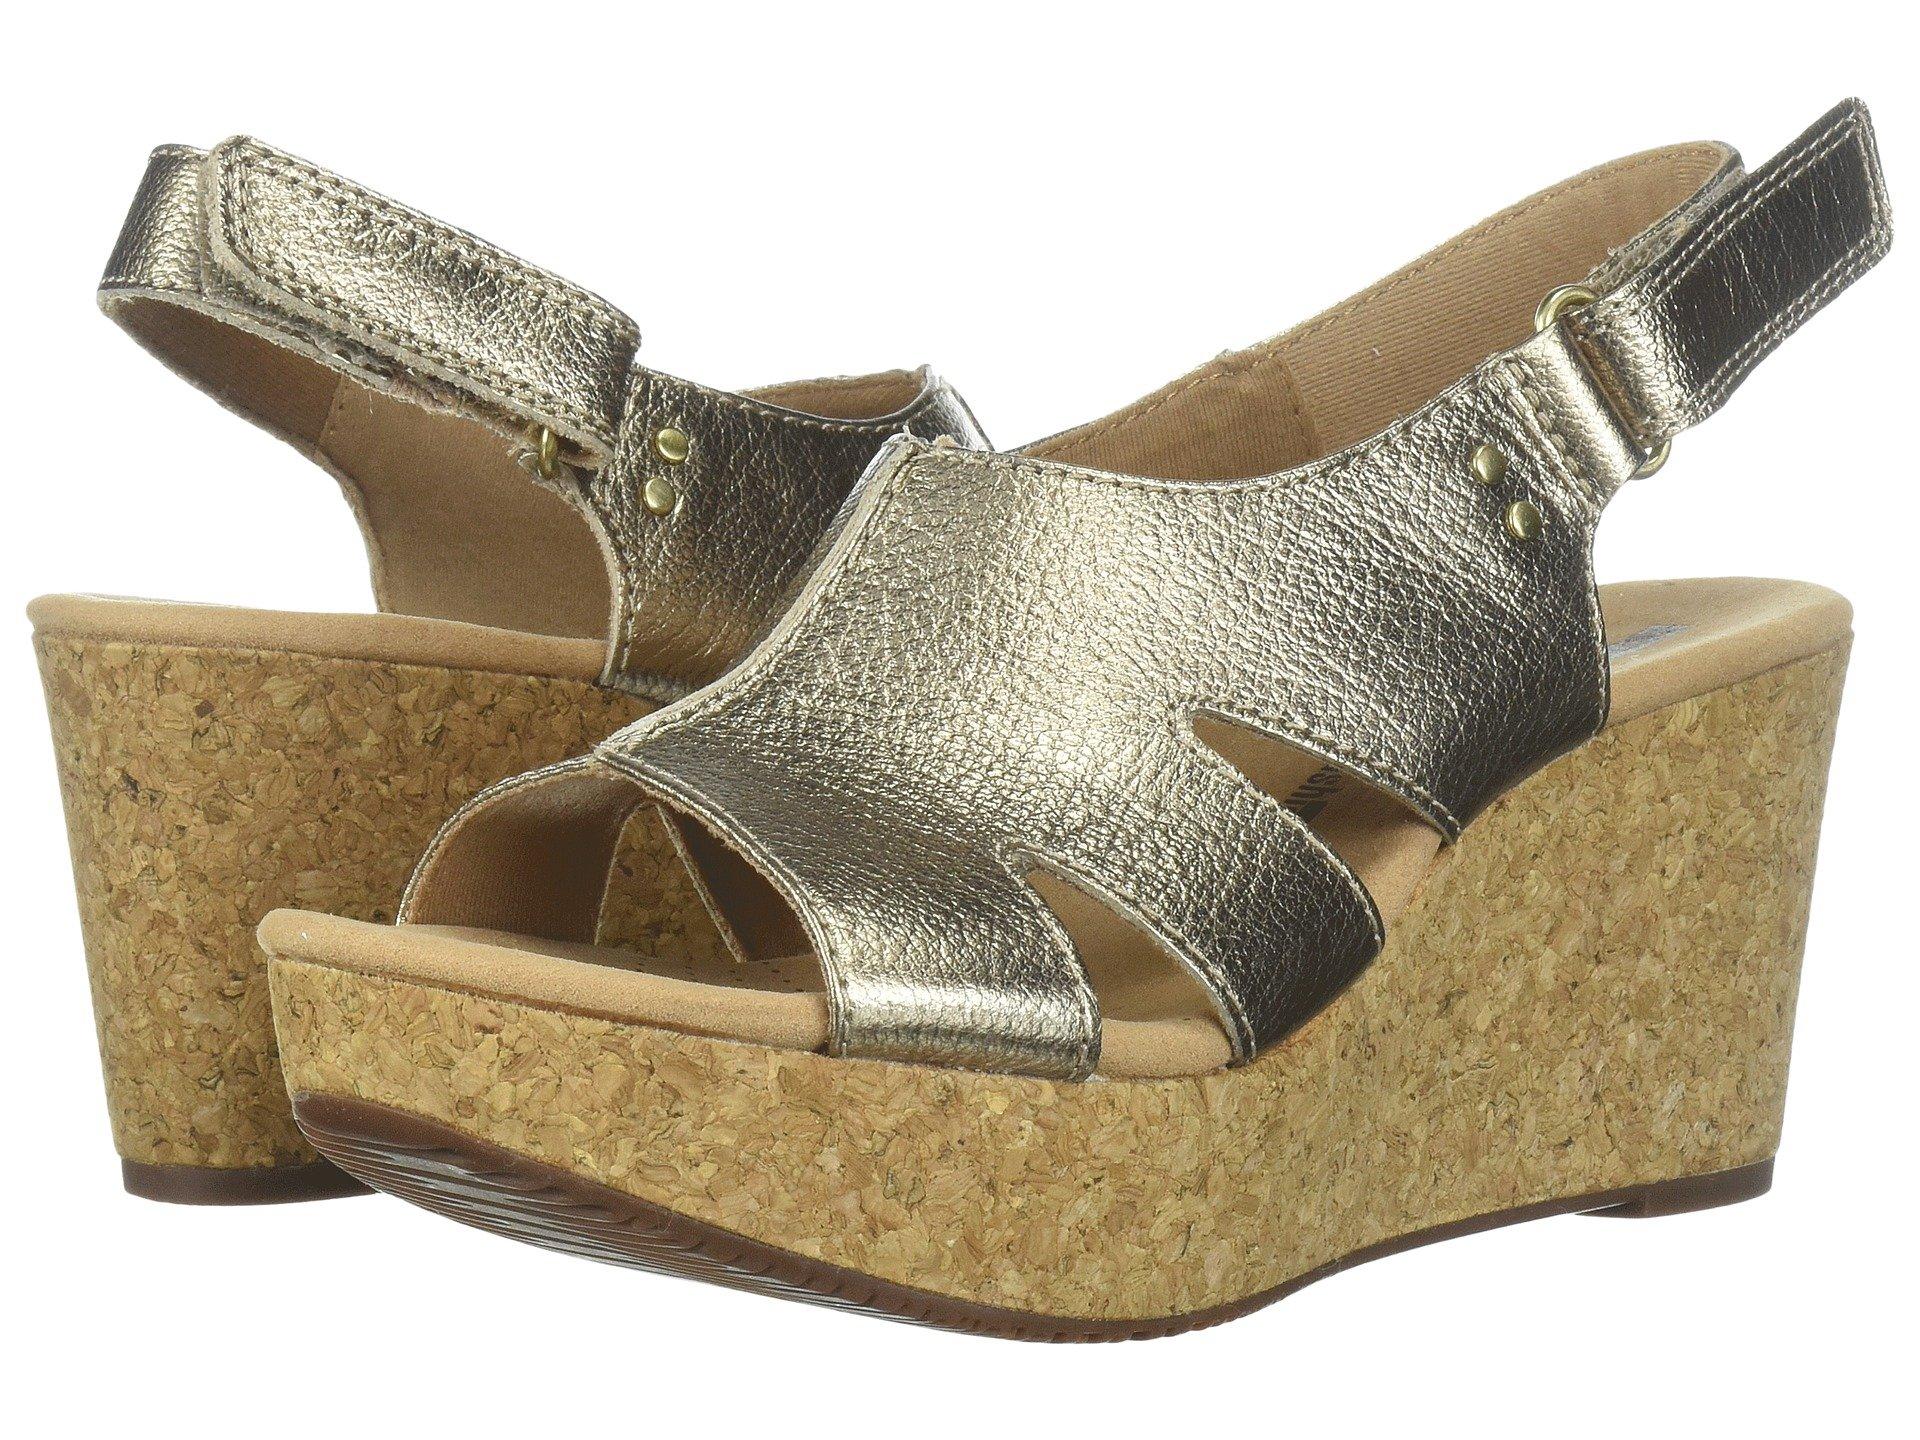 clarks gold wedge sandals off 60 